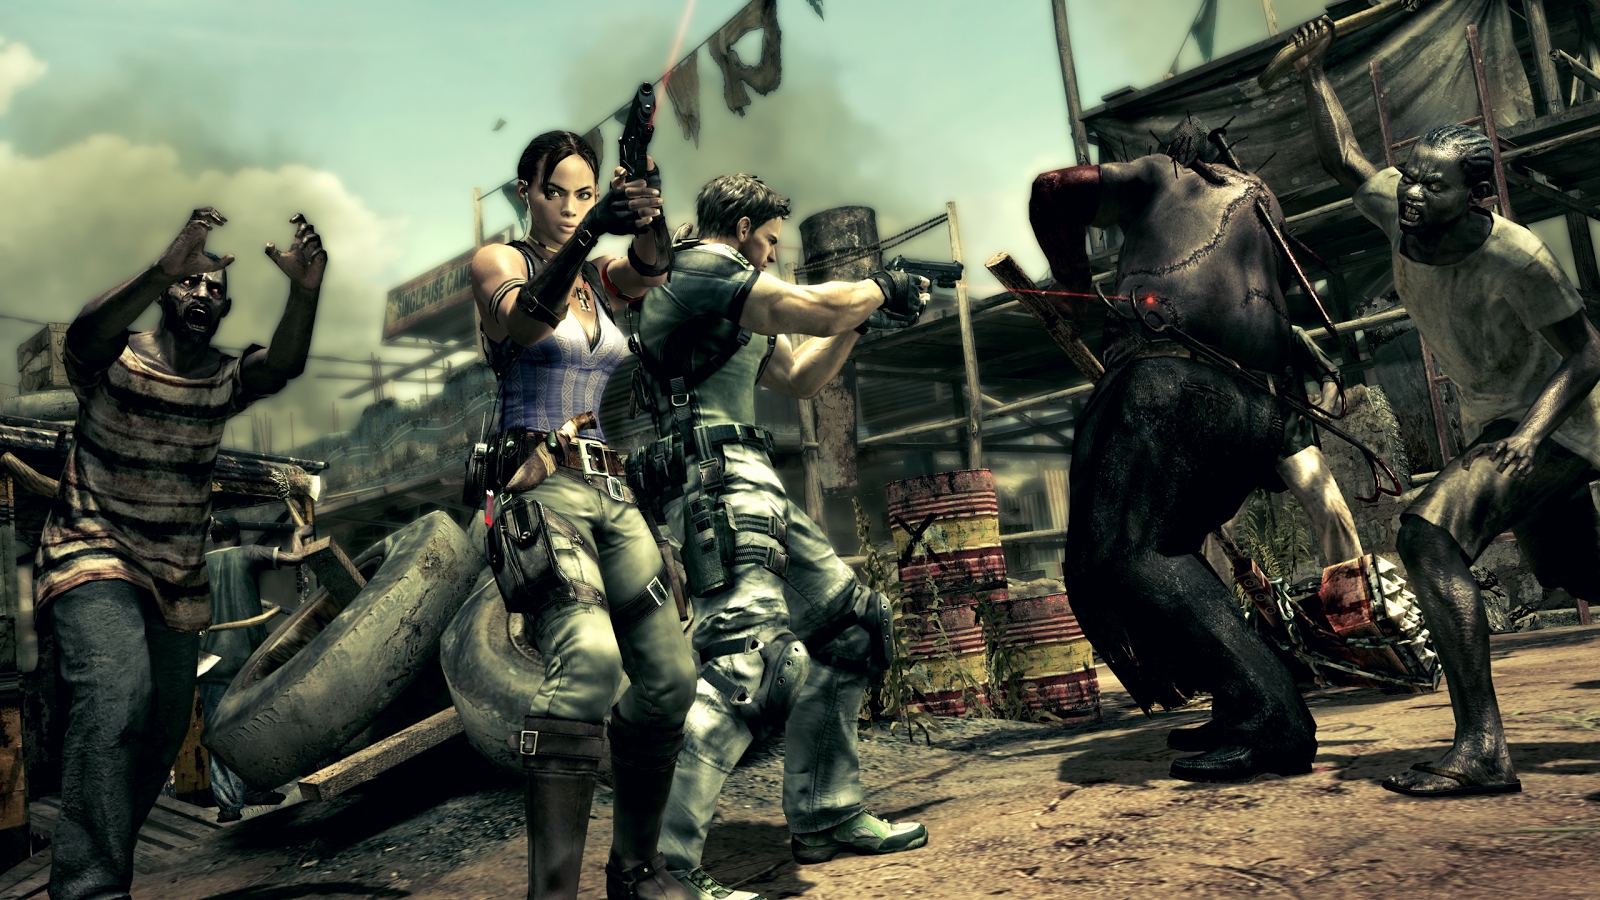 Download Resident evil 5 Any android phone.100% work. 